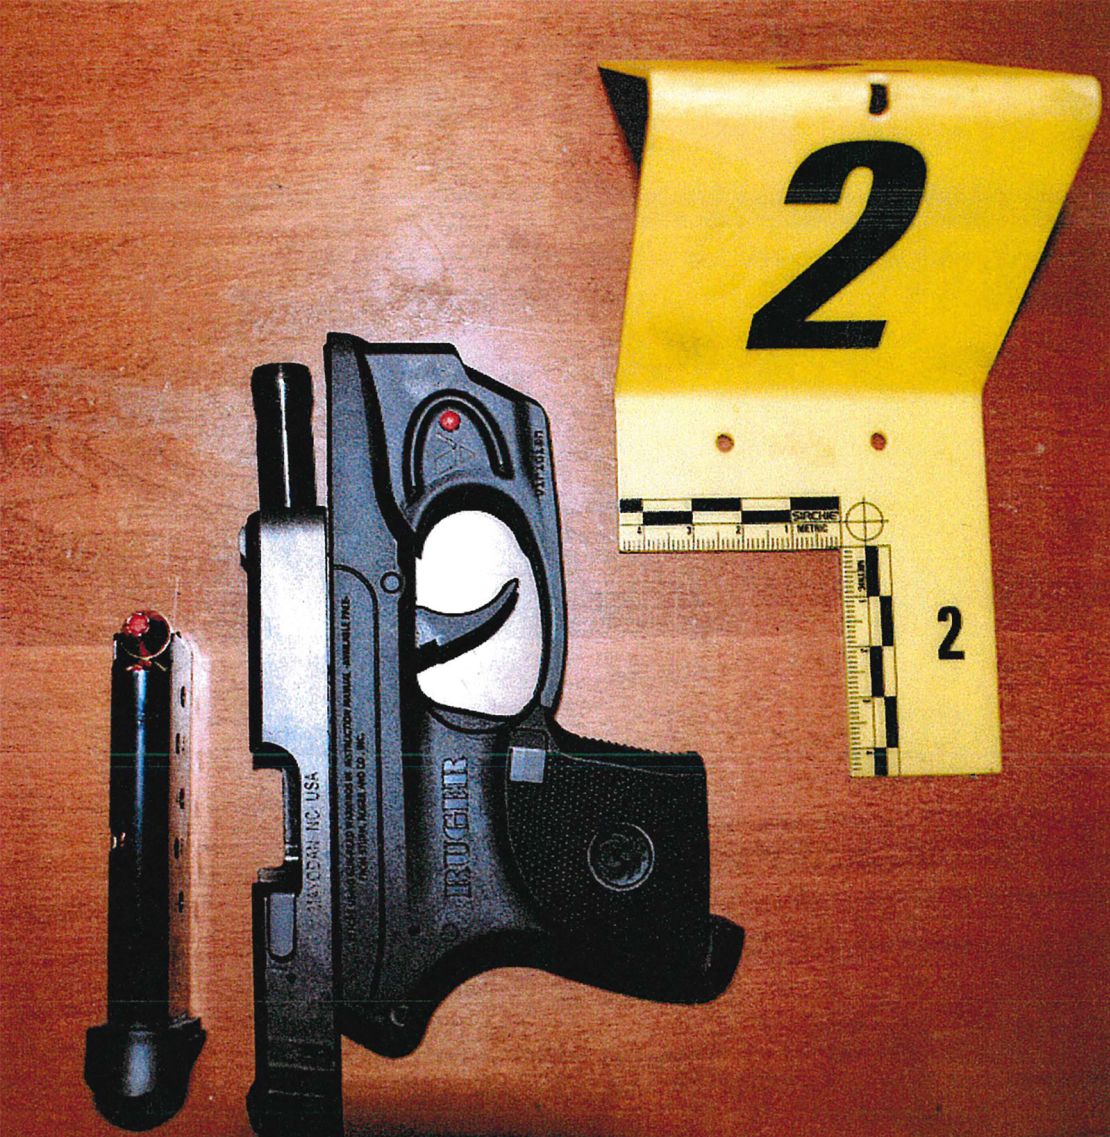 Pistol and loaded magazine seized by Burlington Police Department from Eaton's bedroom.